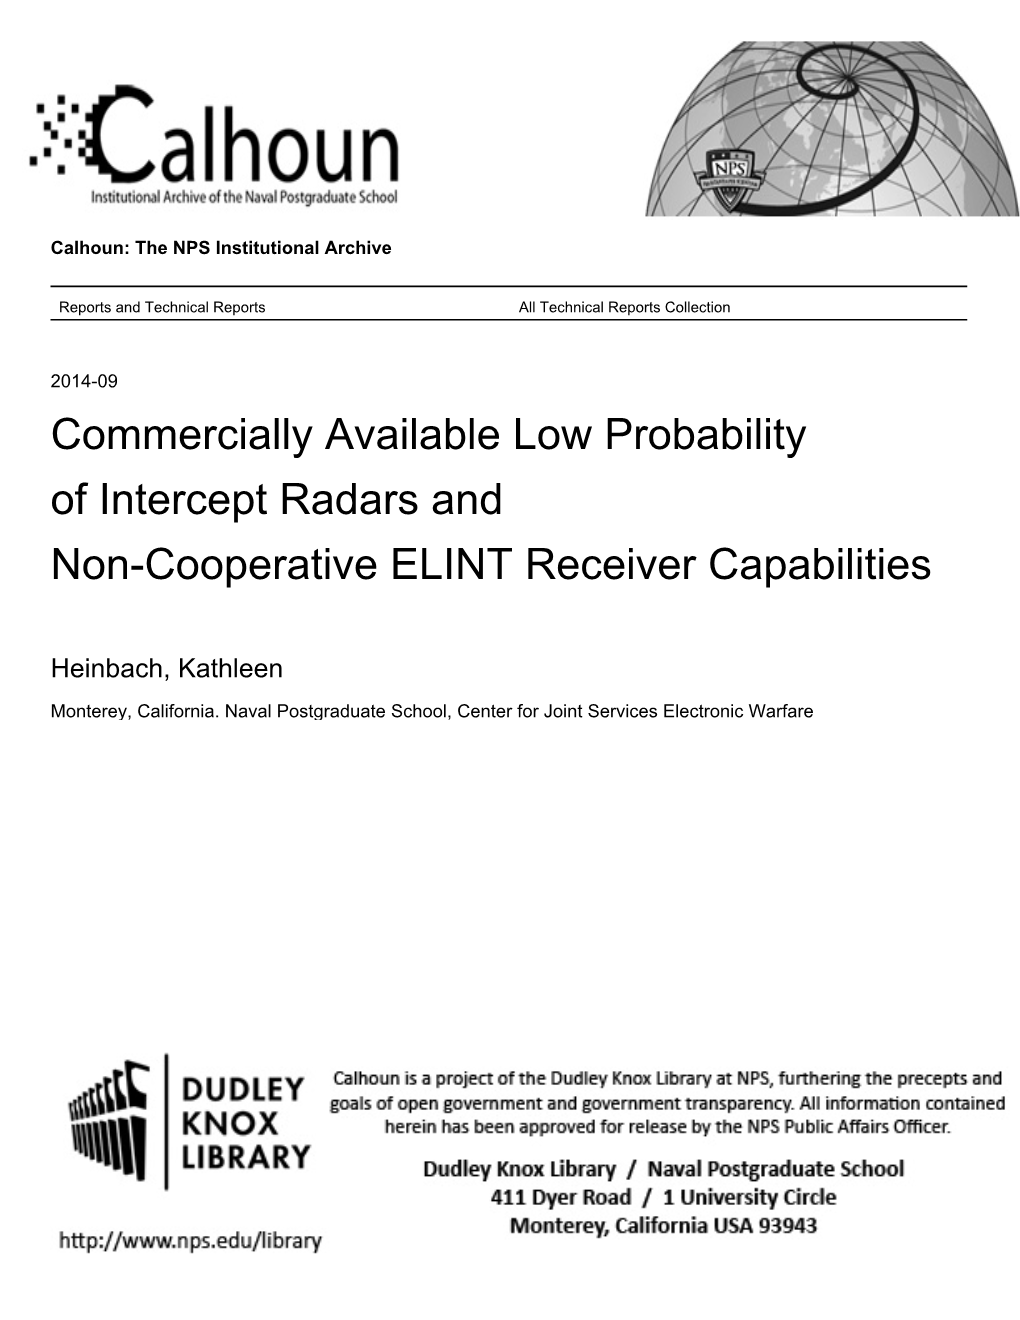 Commercially Available Low Probability of Intercept Radars and Non-Cooperative ELINT Receiver Capabilities